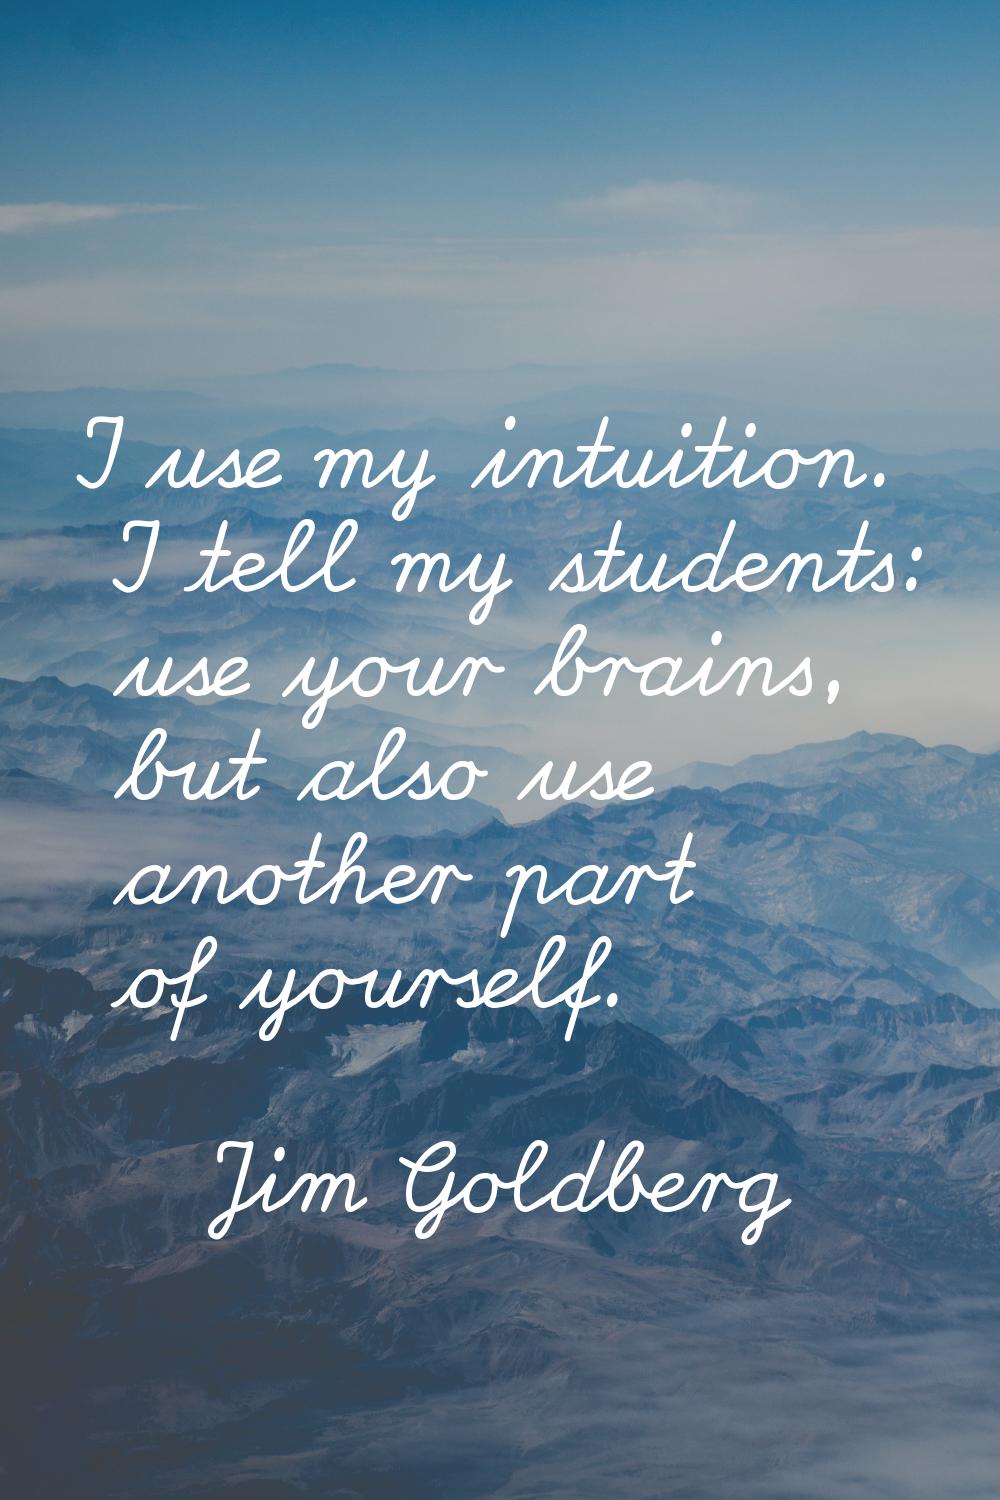 I use my intuition. I tell my students: use your brains, but also use another part of yourself.